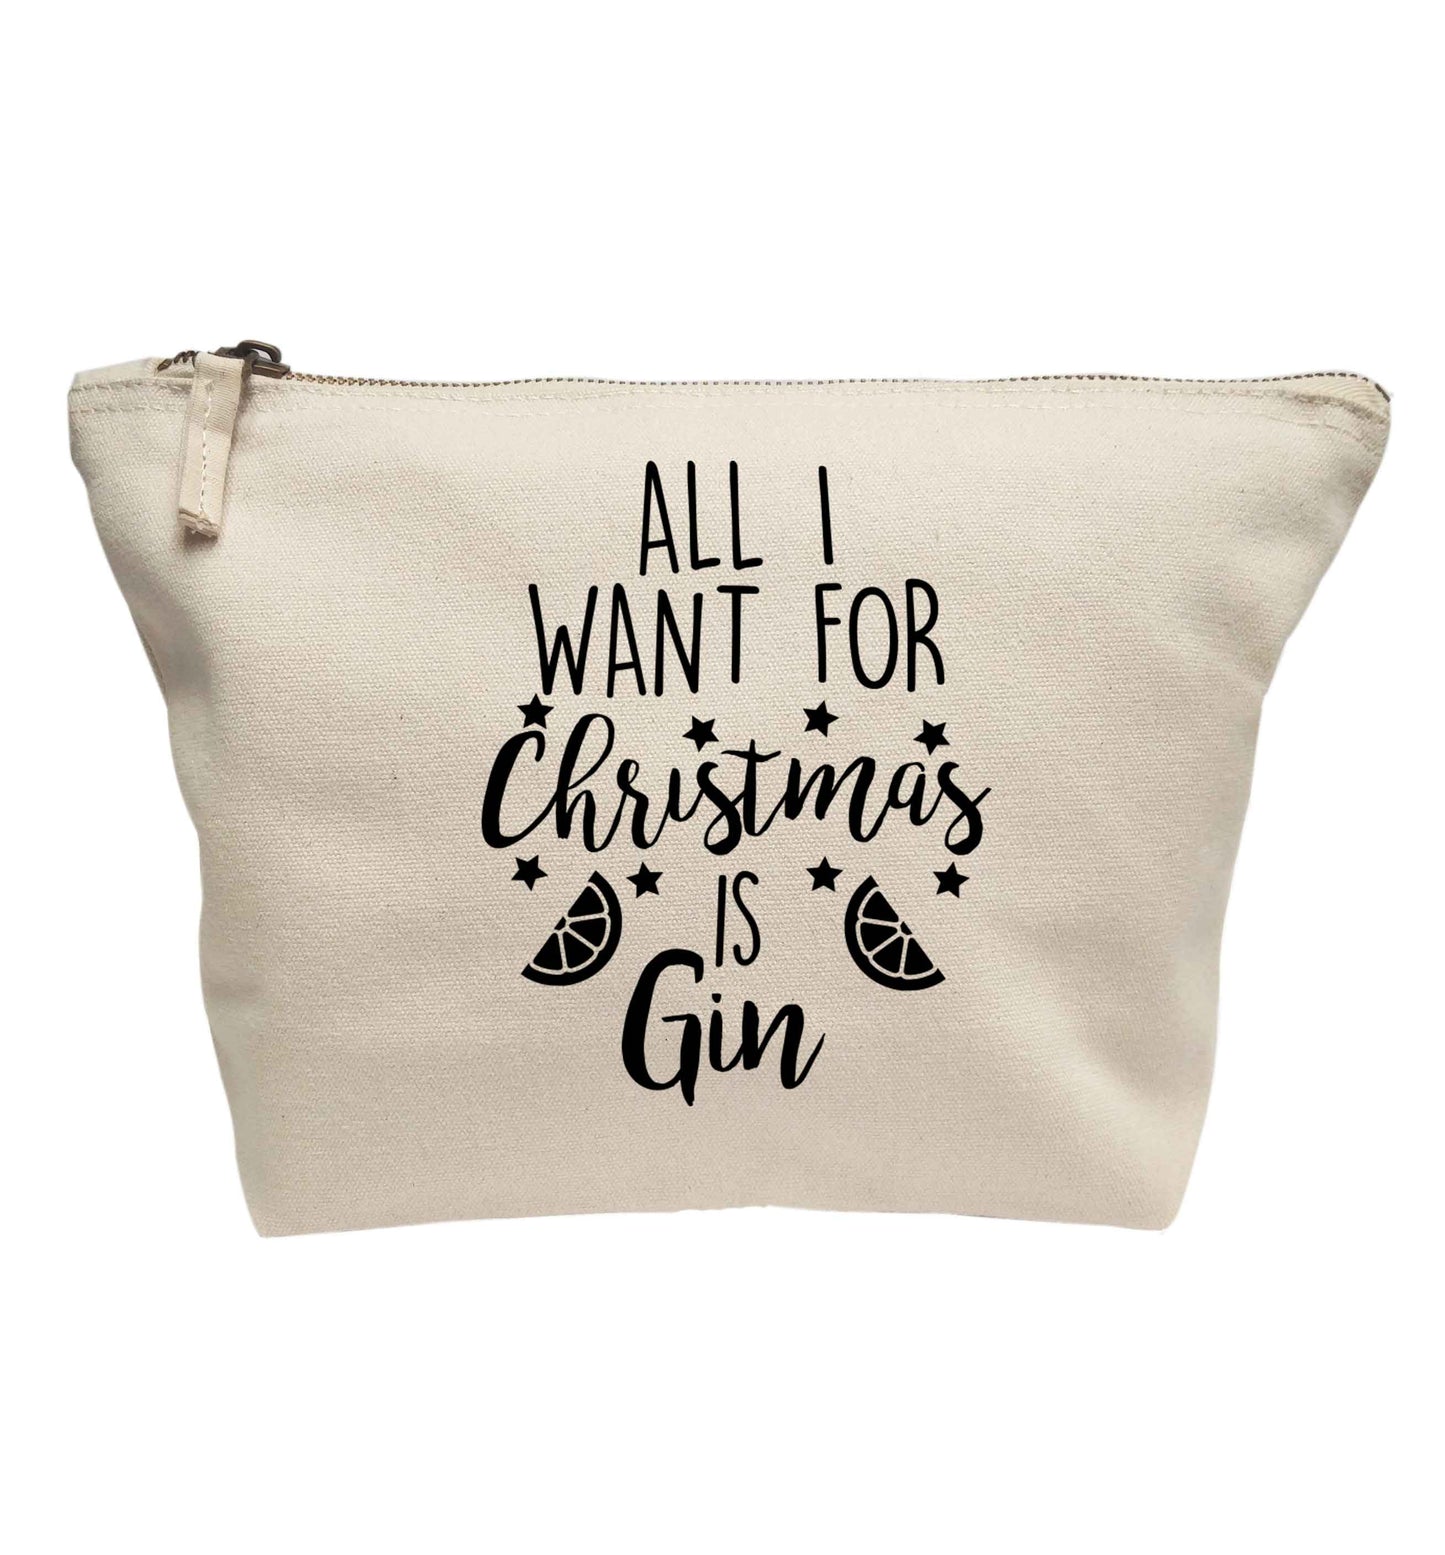 All I want for Christmas is gin | makeup / wash bag